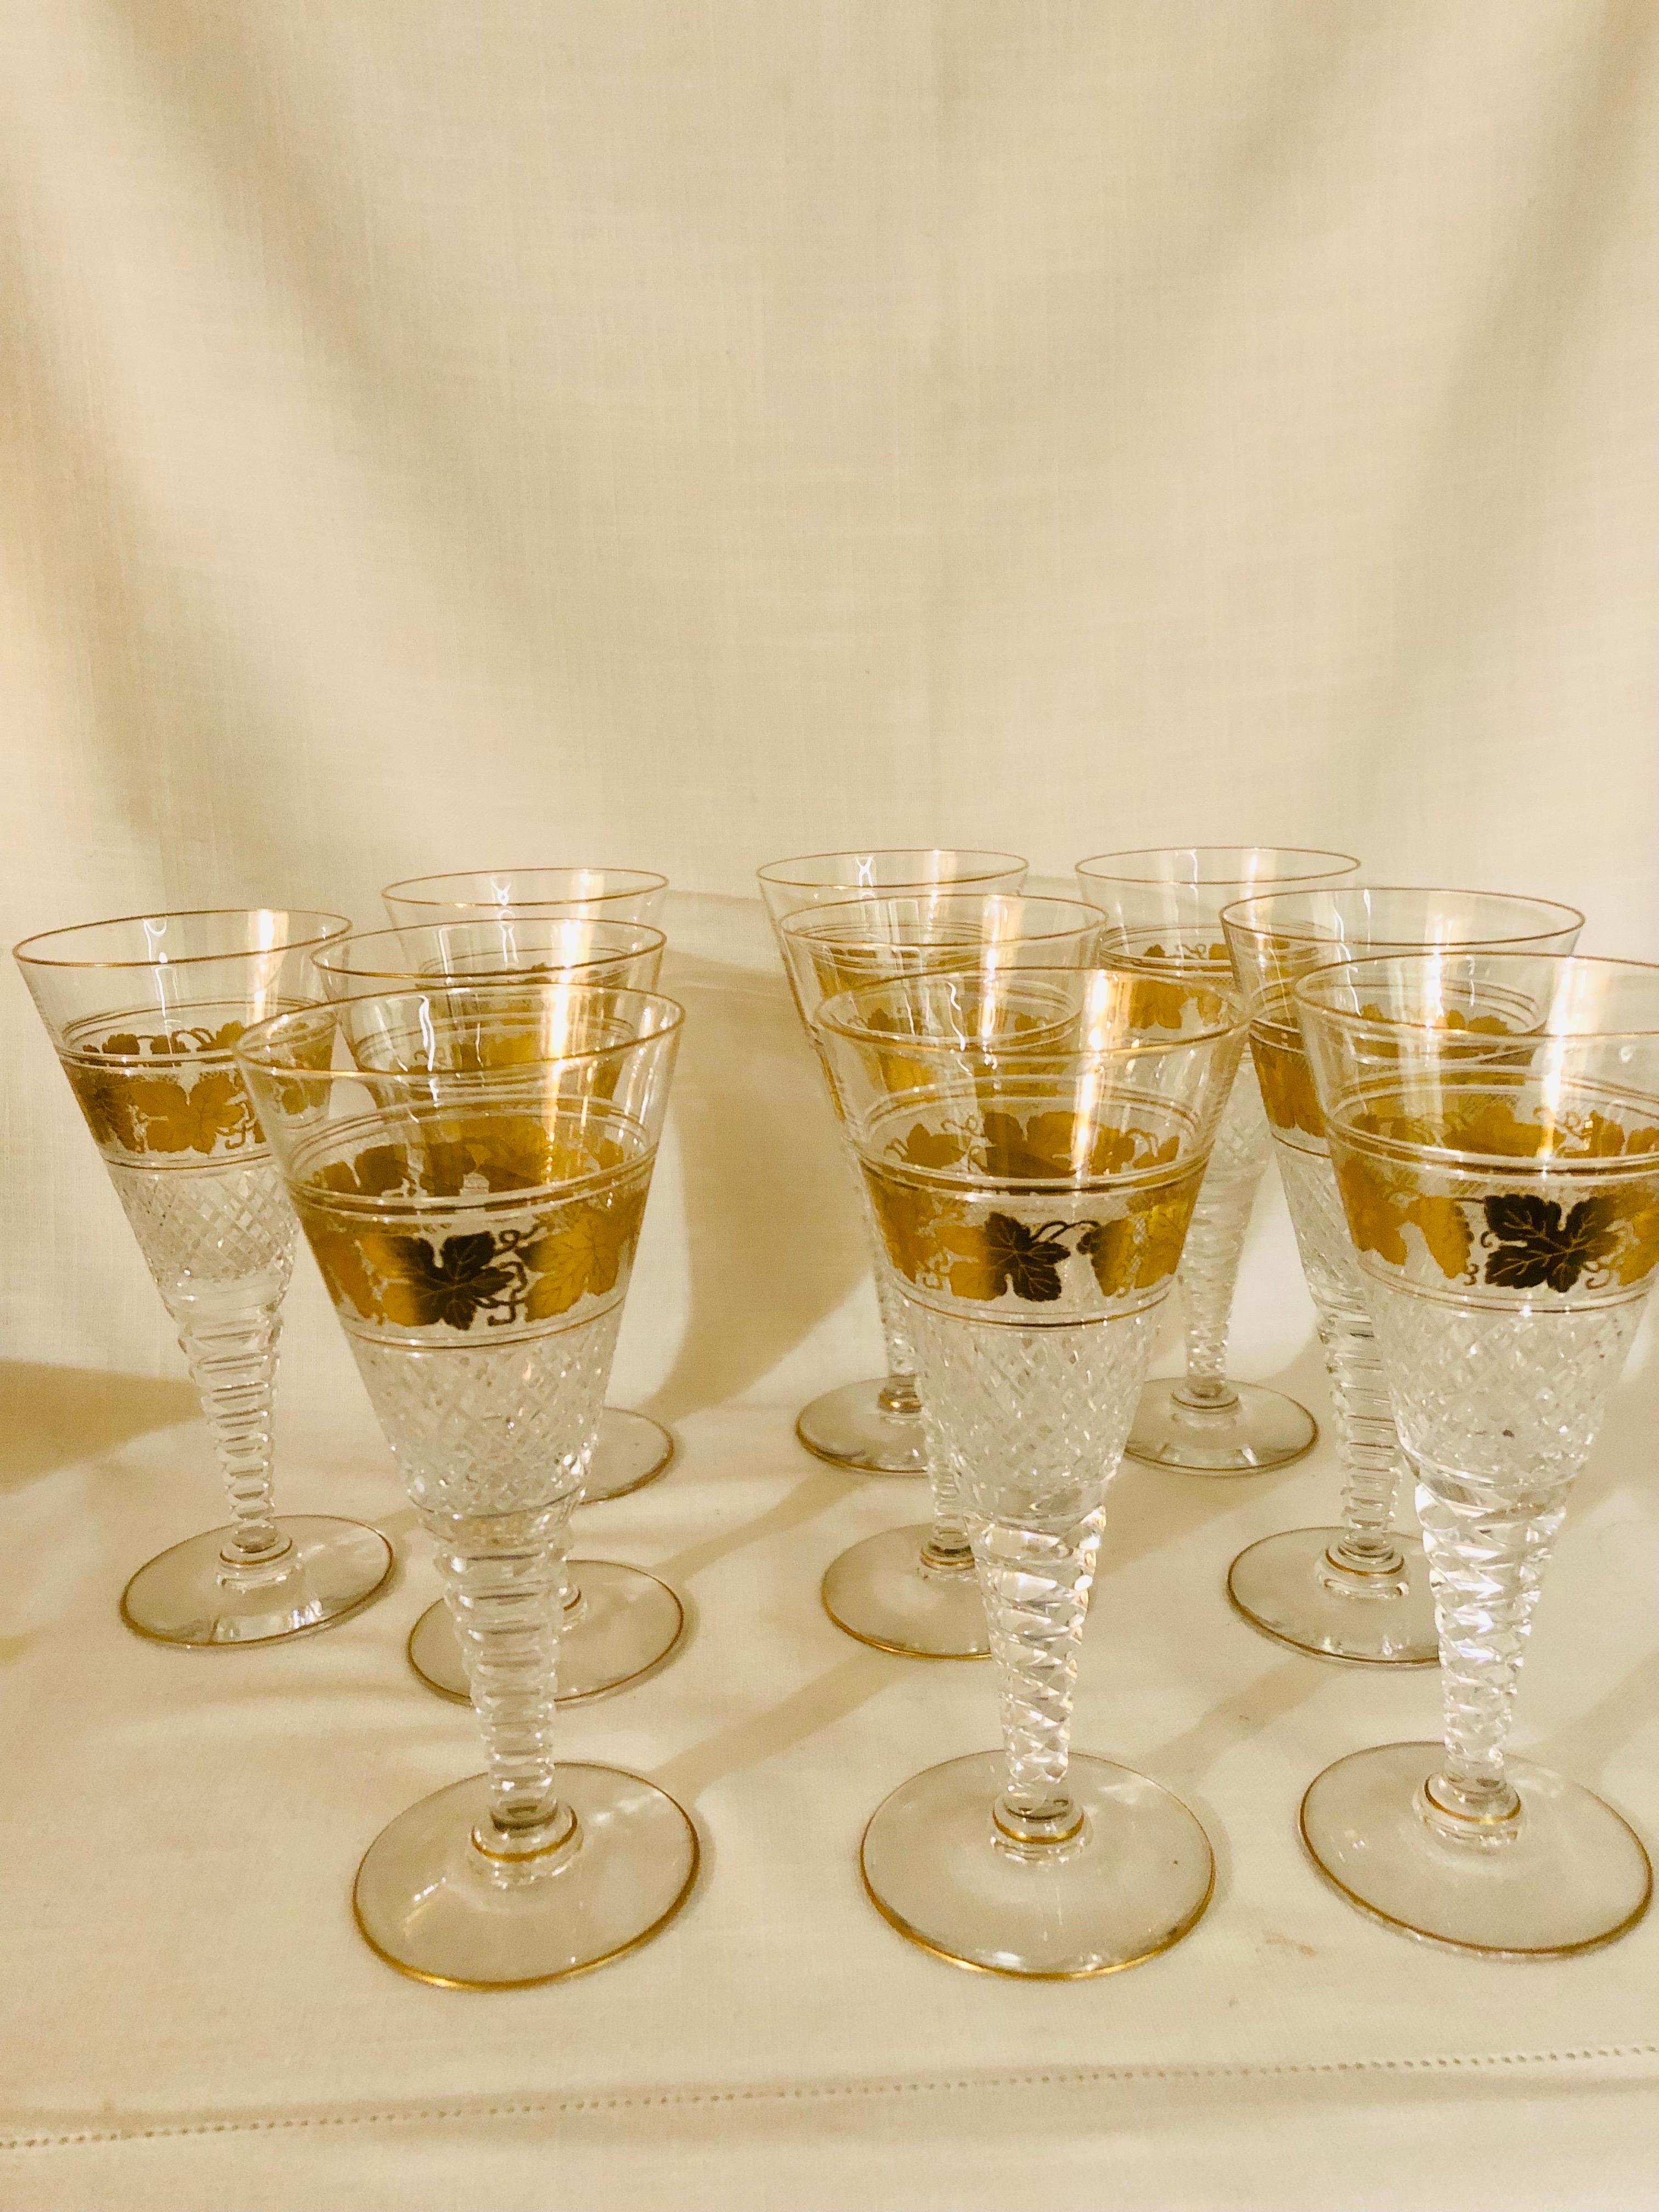 Mid-20th Century Set of Ten Val St. Lambert Belgium Cut Crystal Goblets With Gilded Grape Vines